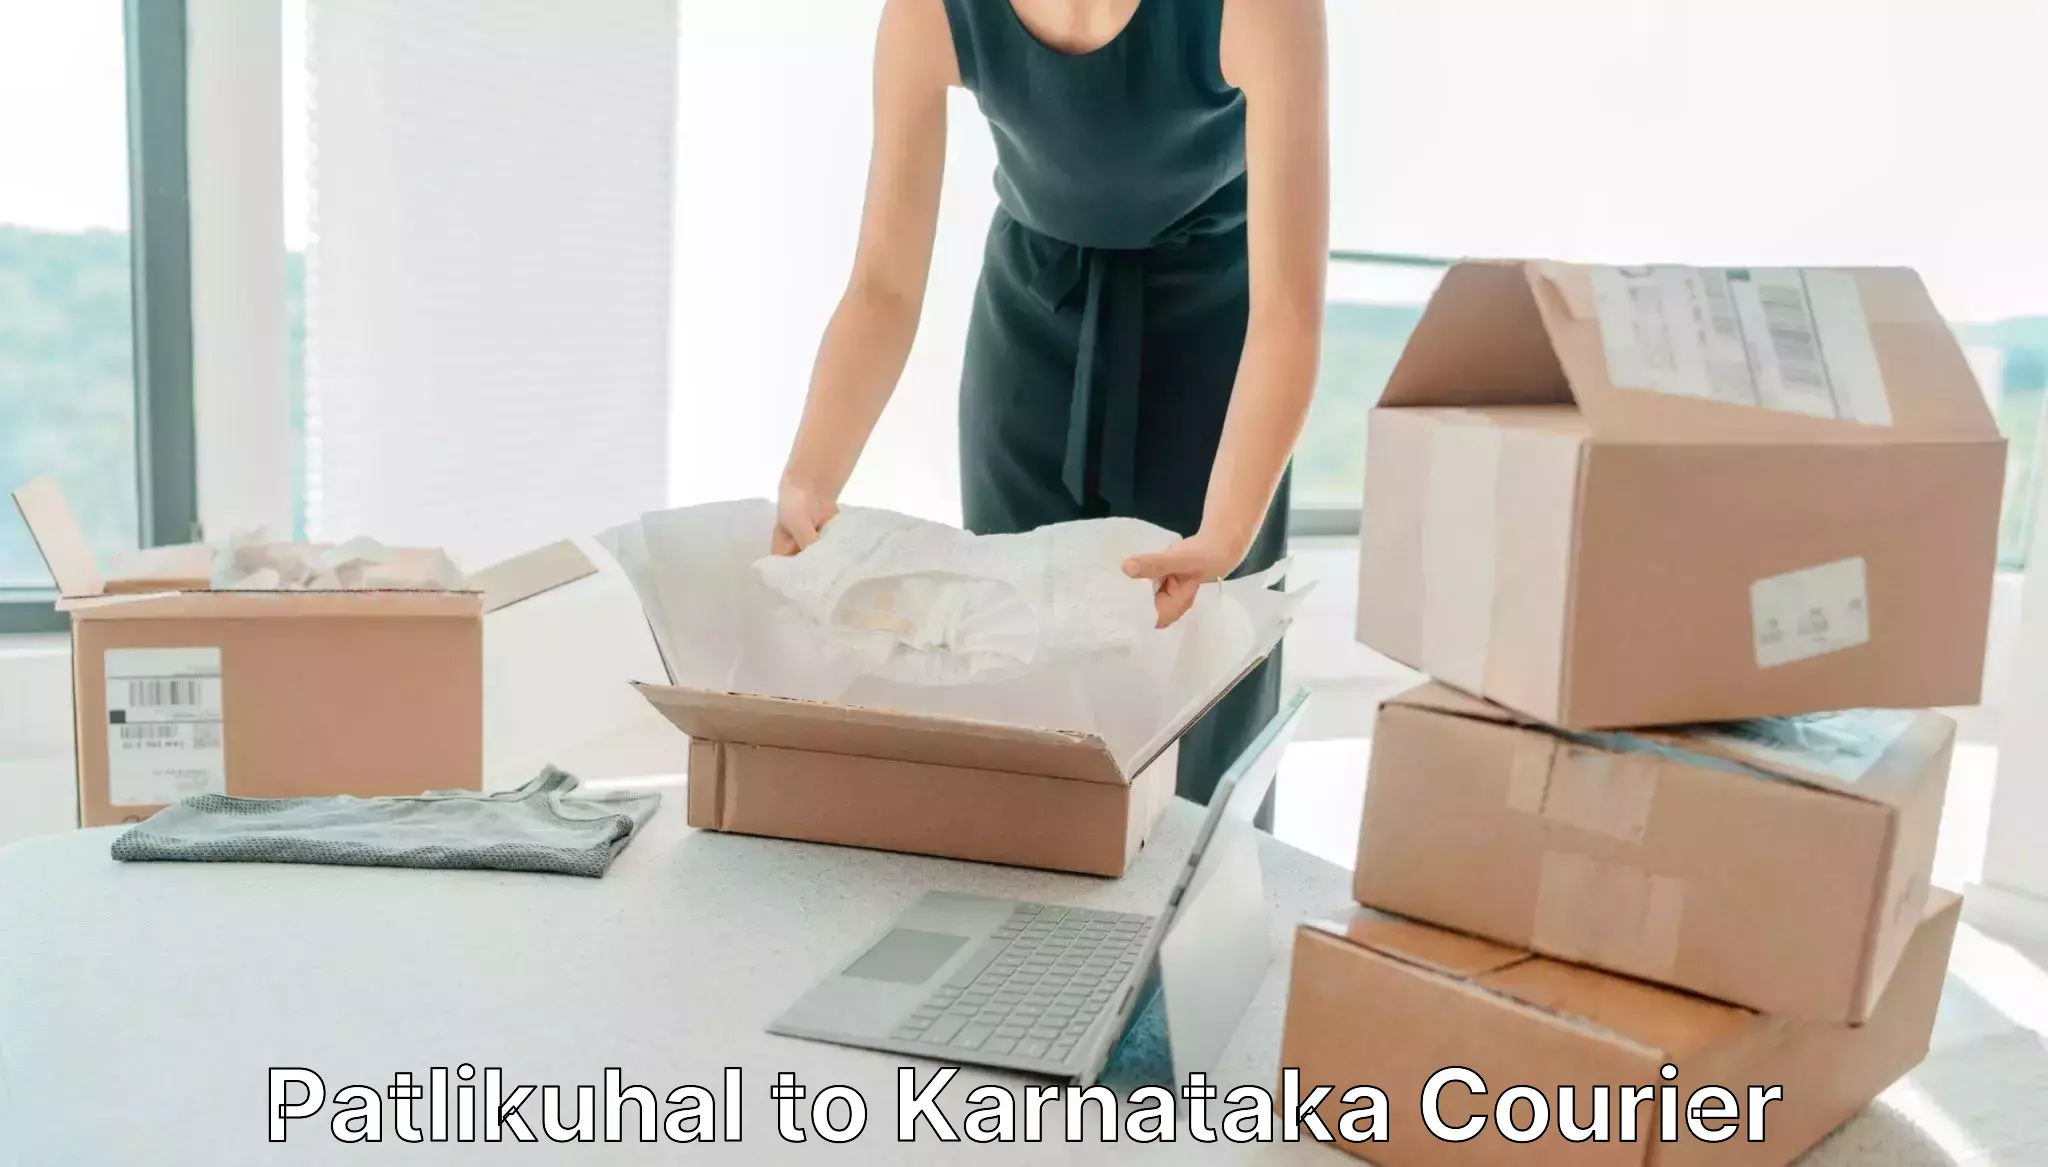 Efficient package consolidation Patlikuhal to Surathkal